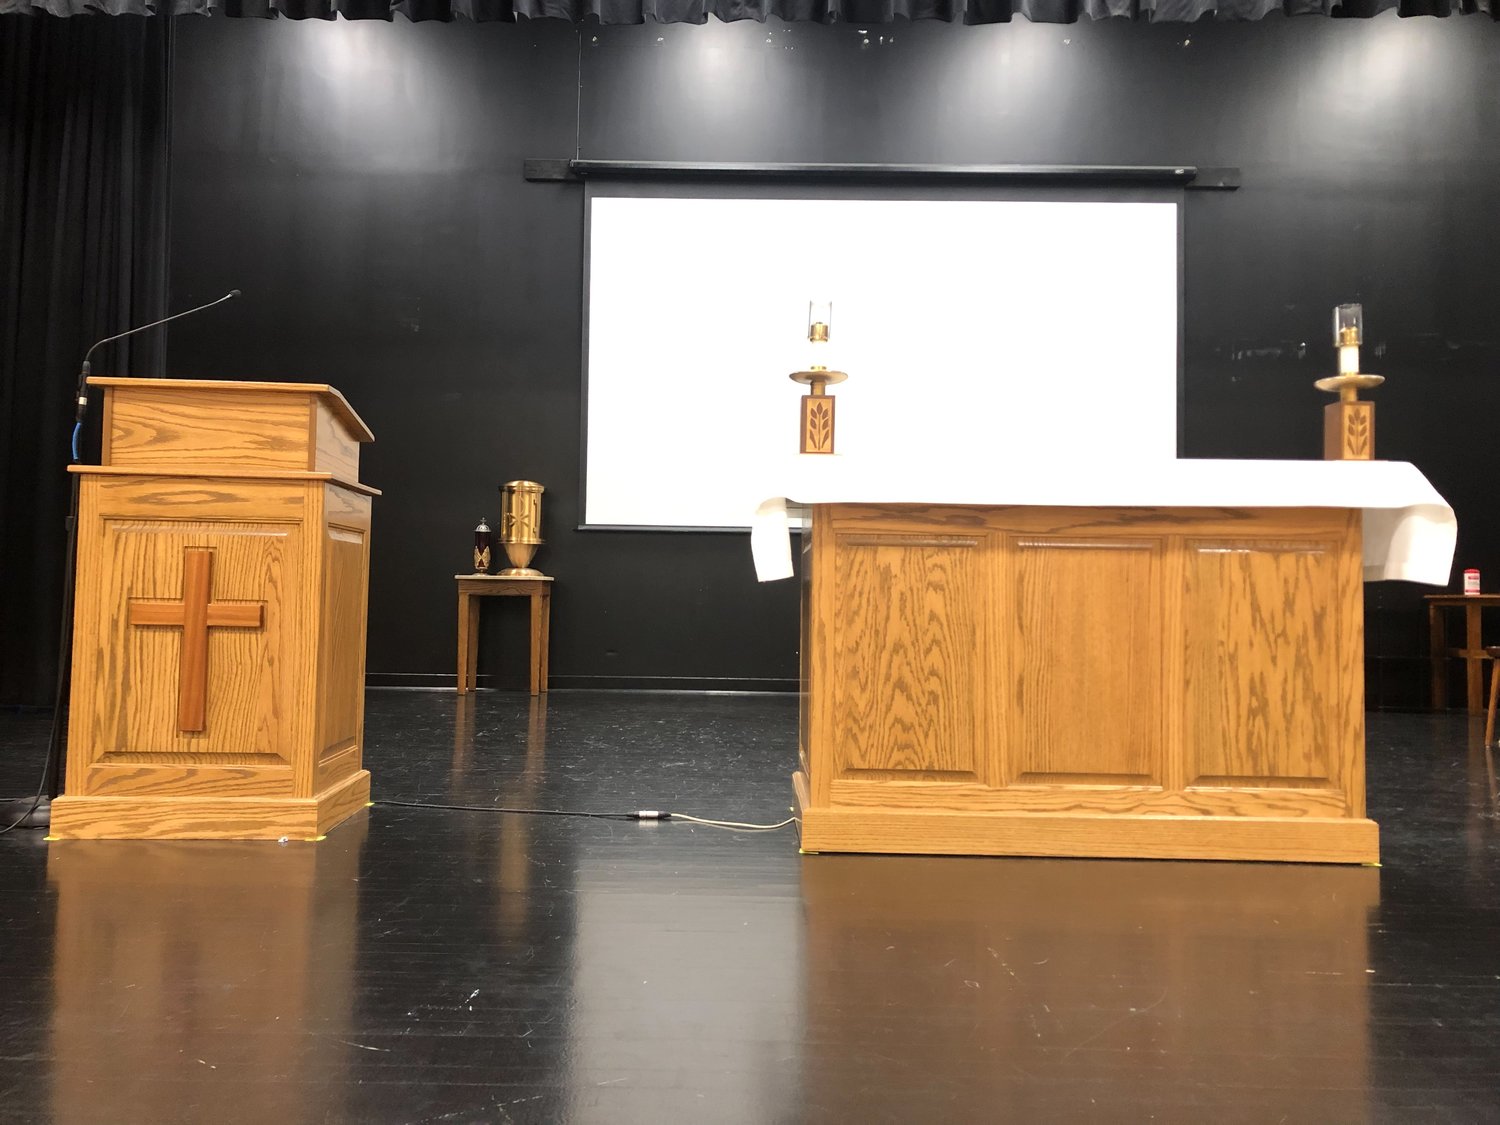 Cathedral of St. Joseph parishioner Clarence Koenigsfeld’s cabinet company made the temporary altar and pulpit for use while the Cathedral is being renovated this year.